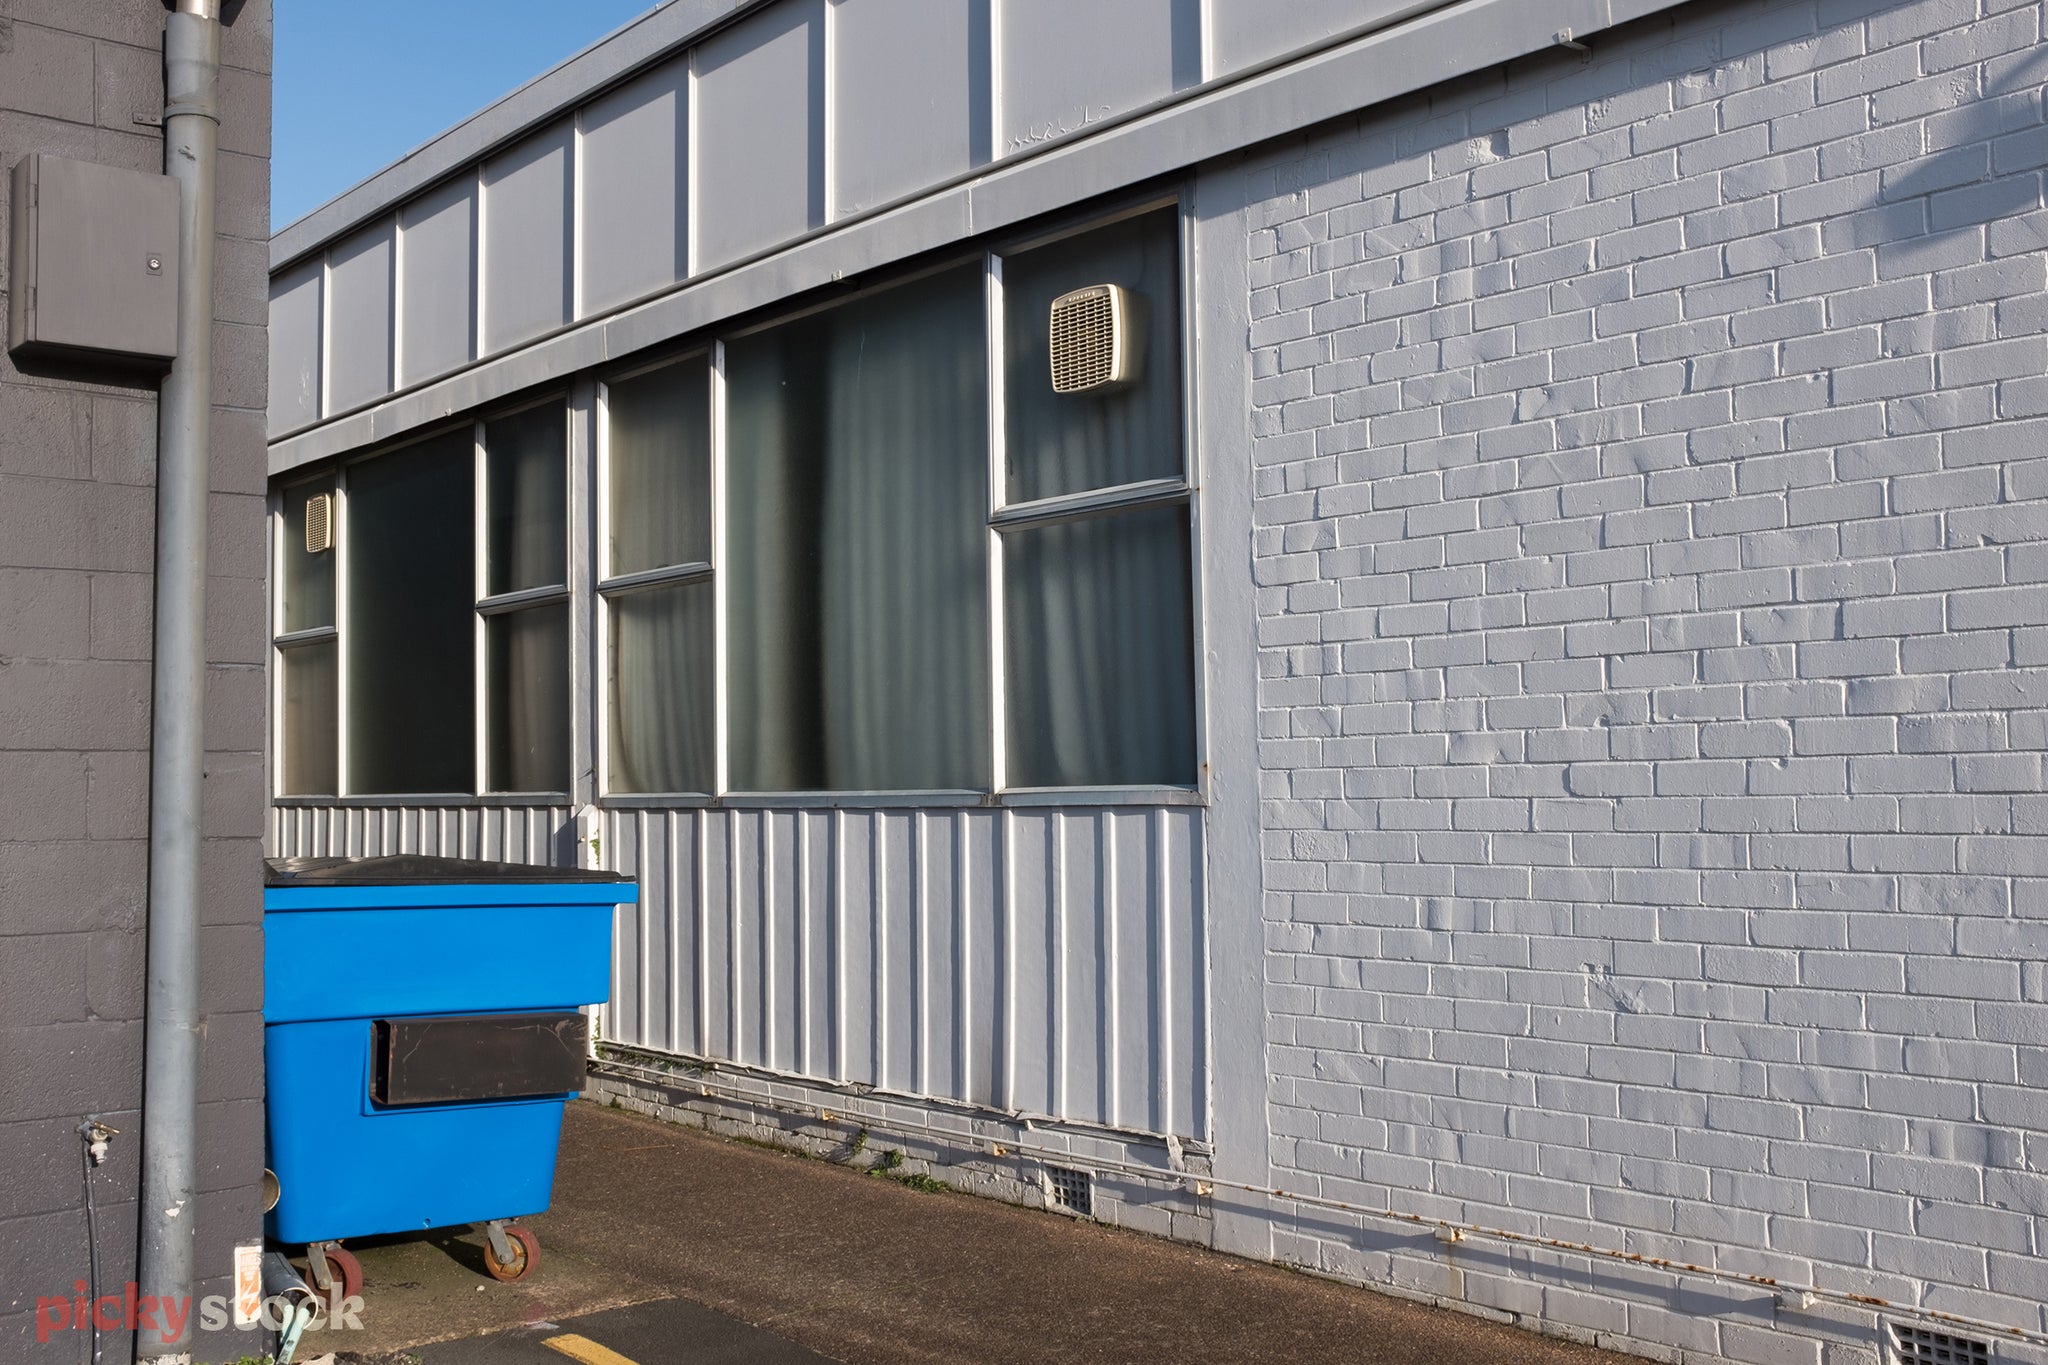 Bright blue skip bin, sits tucked against a white painted old industrial block.